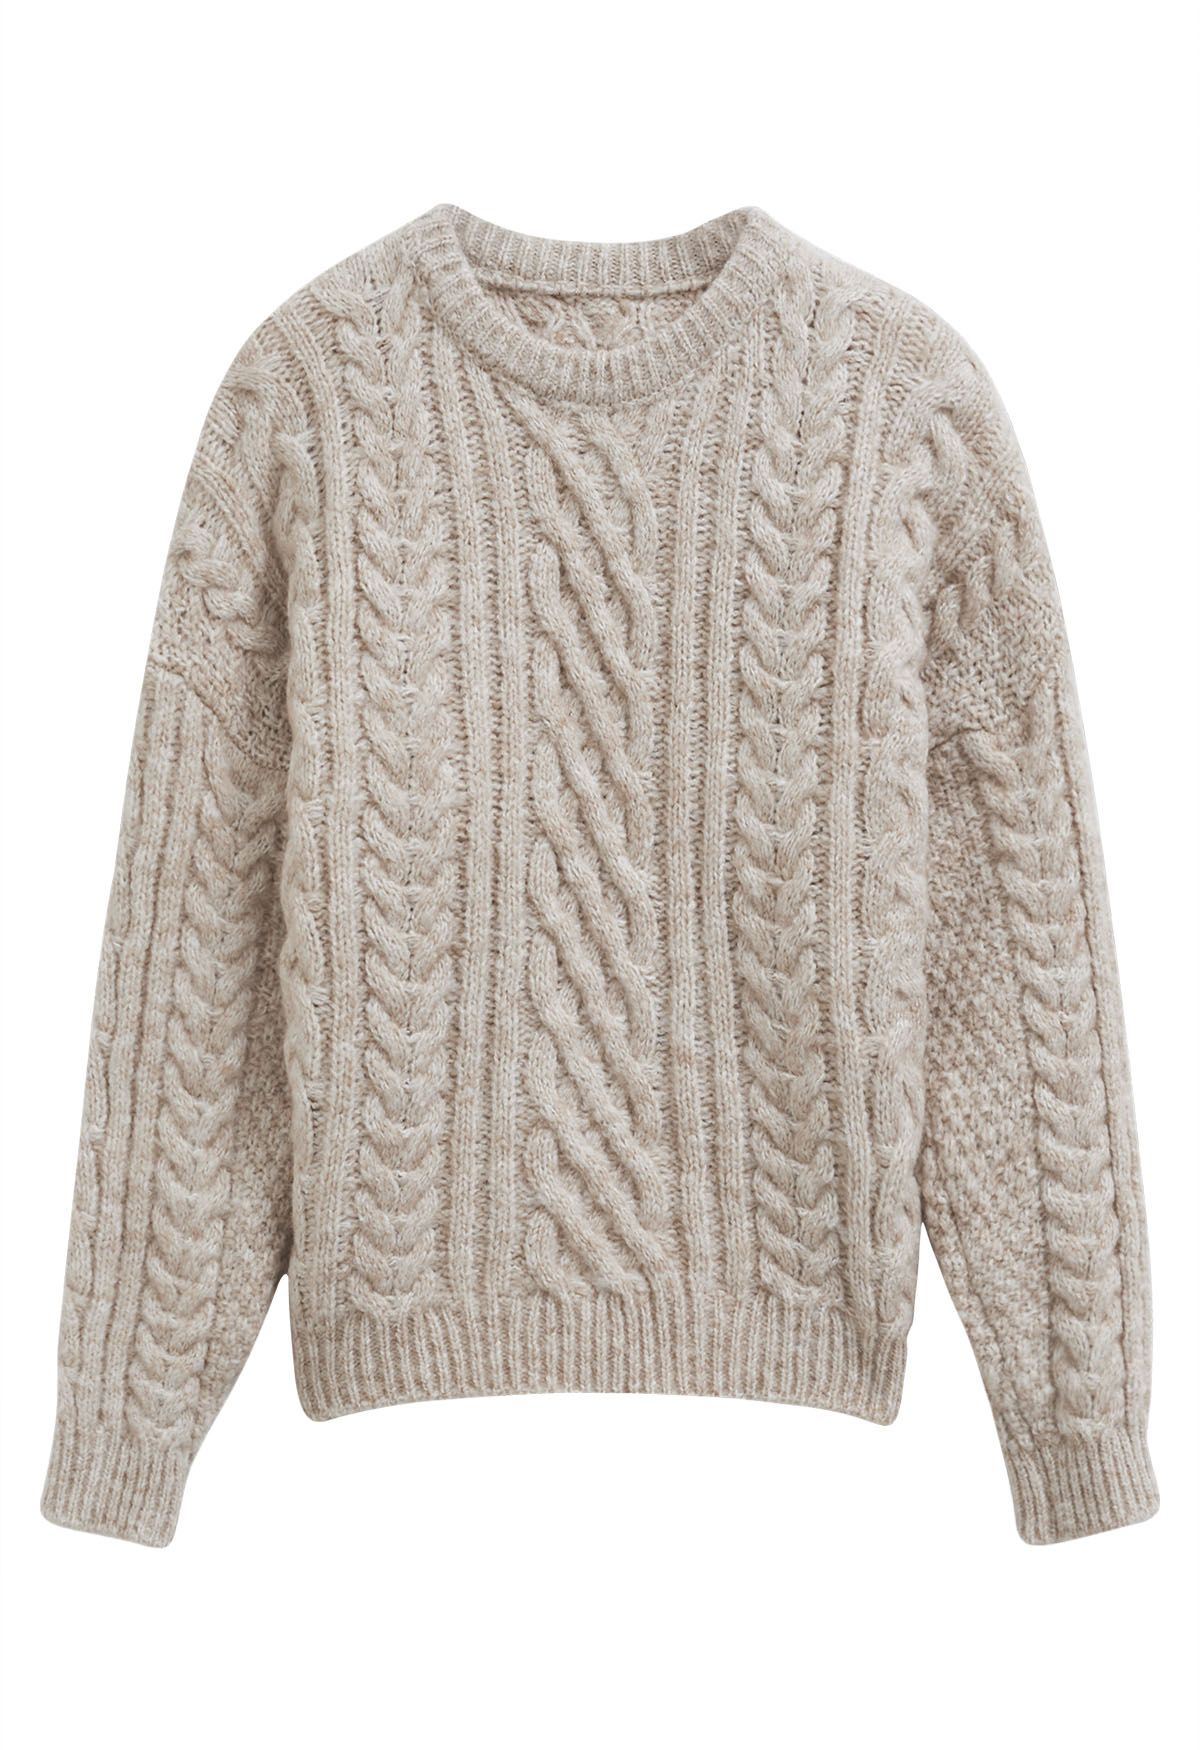 Back To Cozy Cable Knit Sweater in Oatmeal